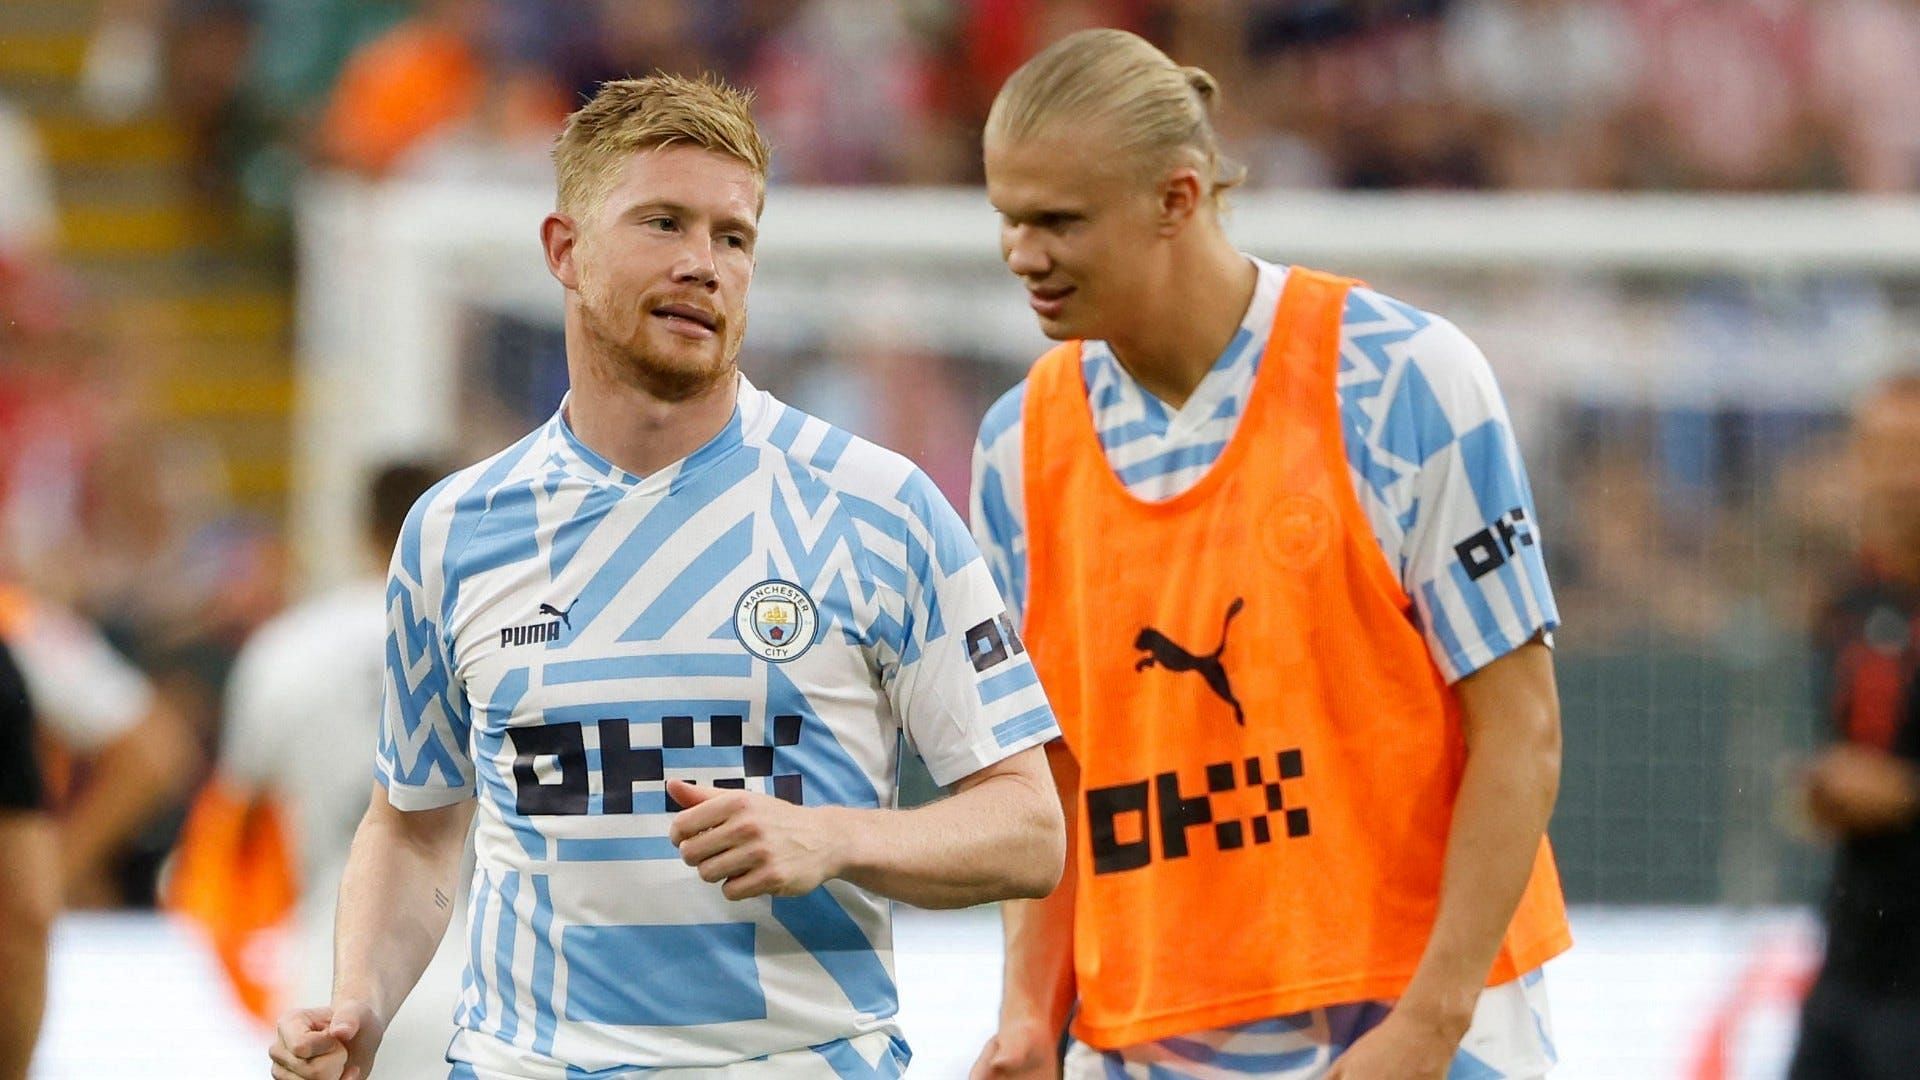 Kevin de Bruyne and Erling Haaland form a deadly combination